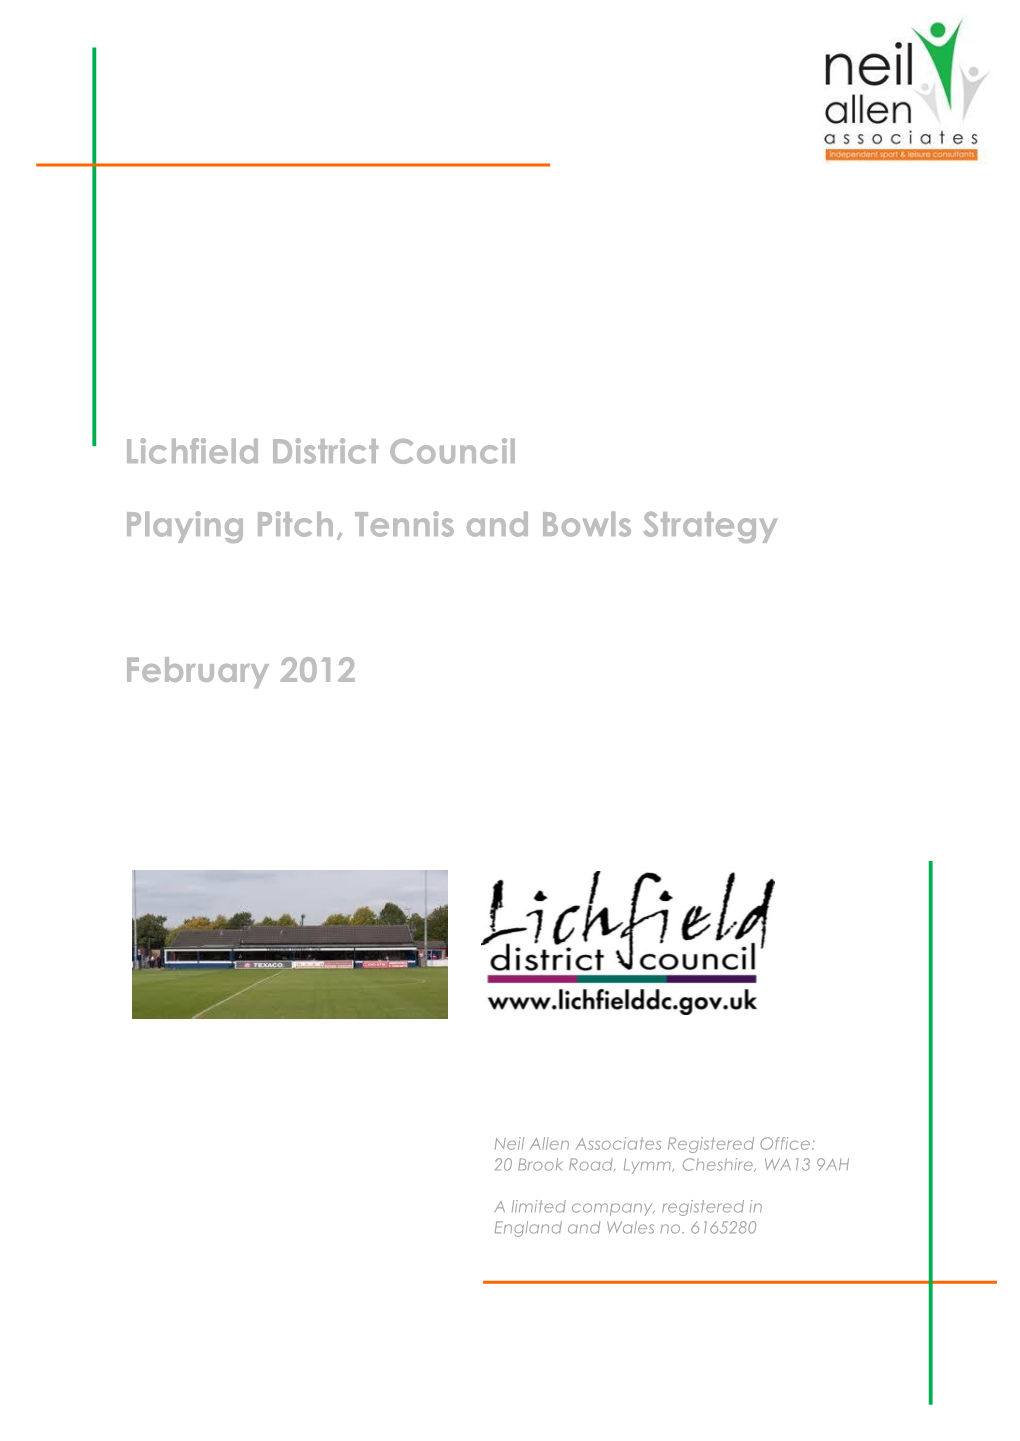 Download: Playing Pitch Tennis and Bowls Strategy 2012